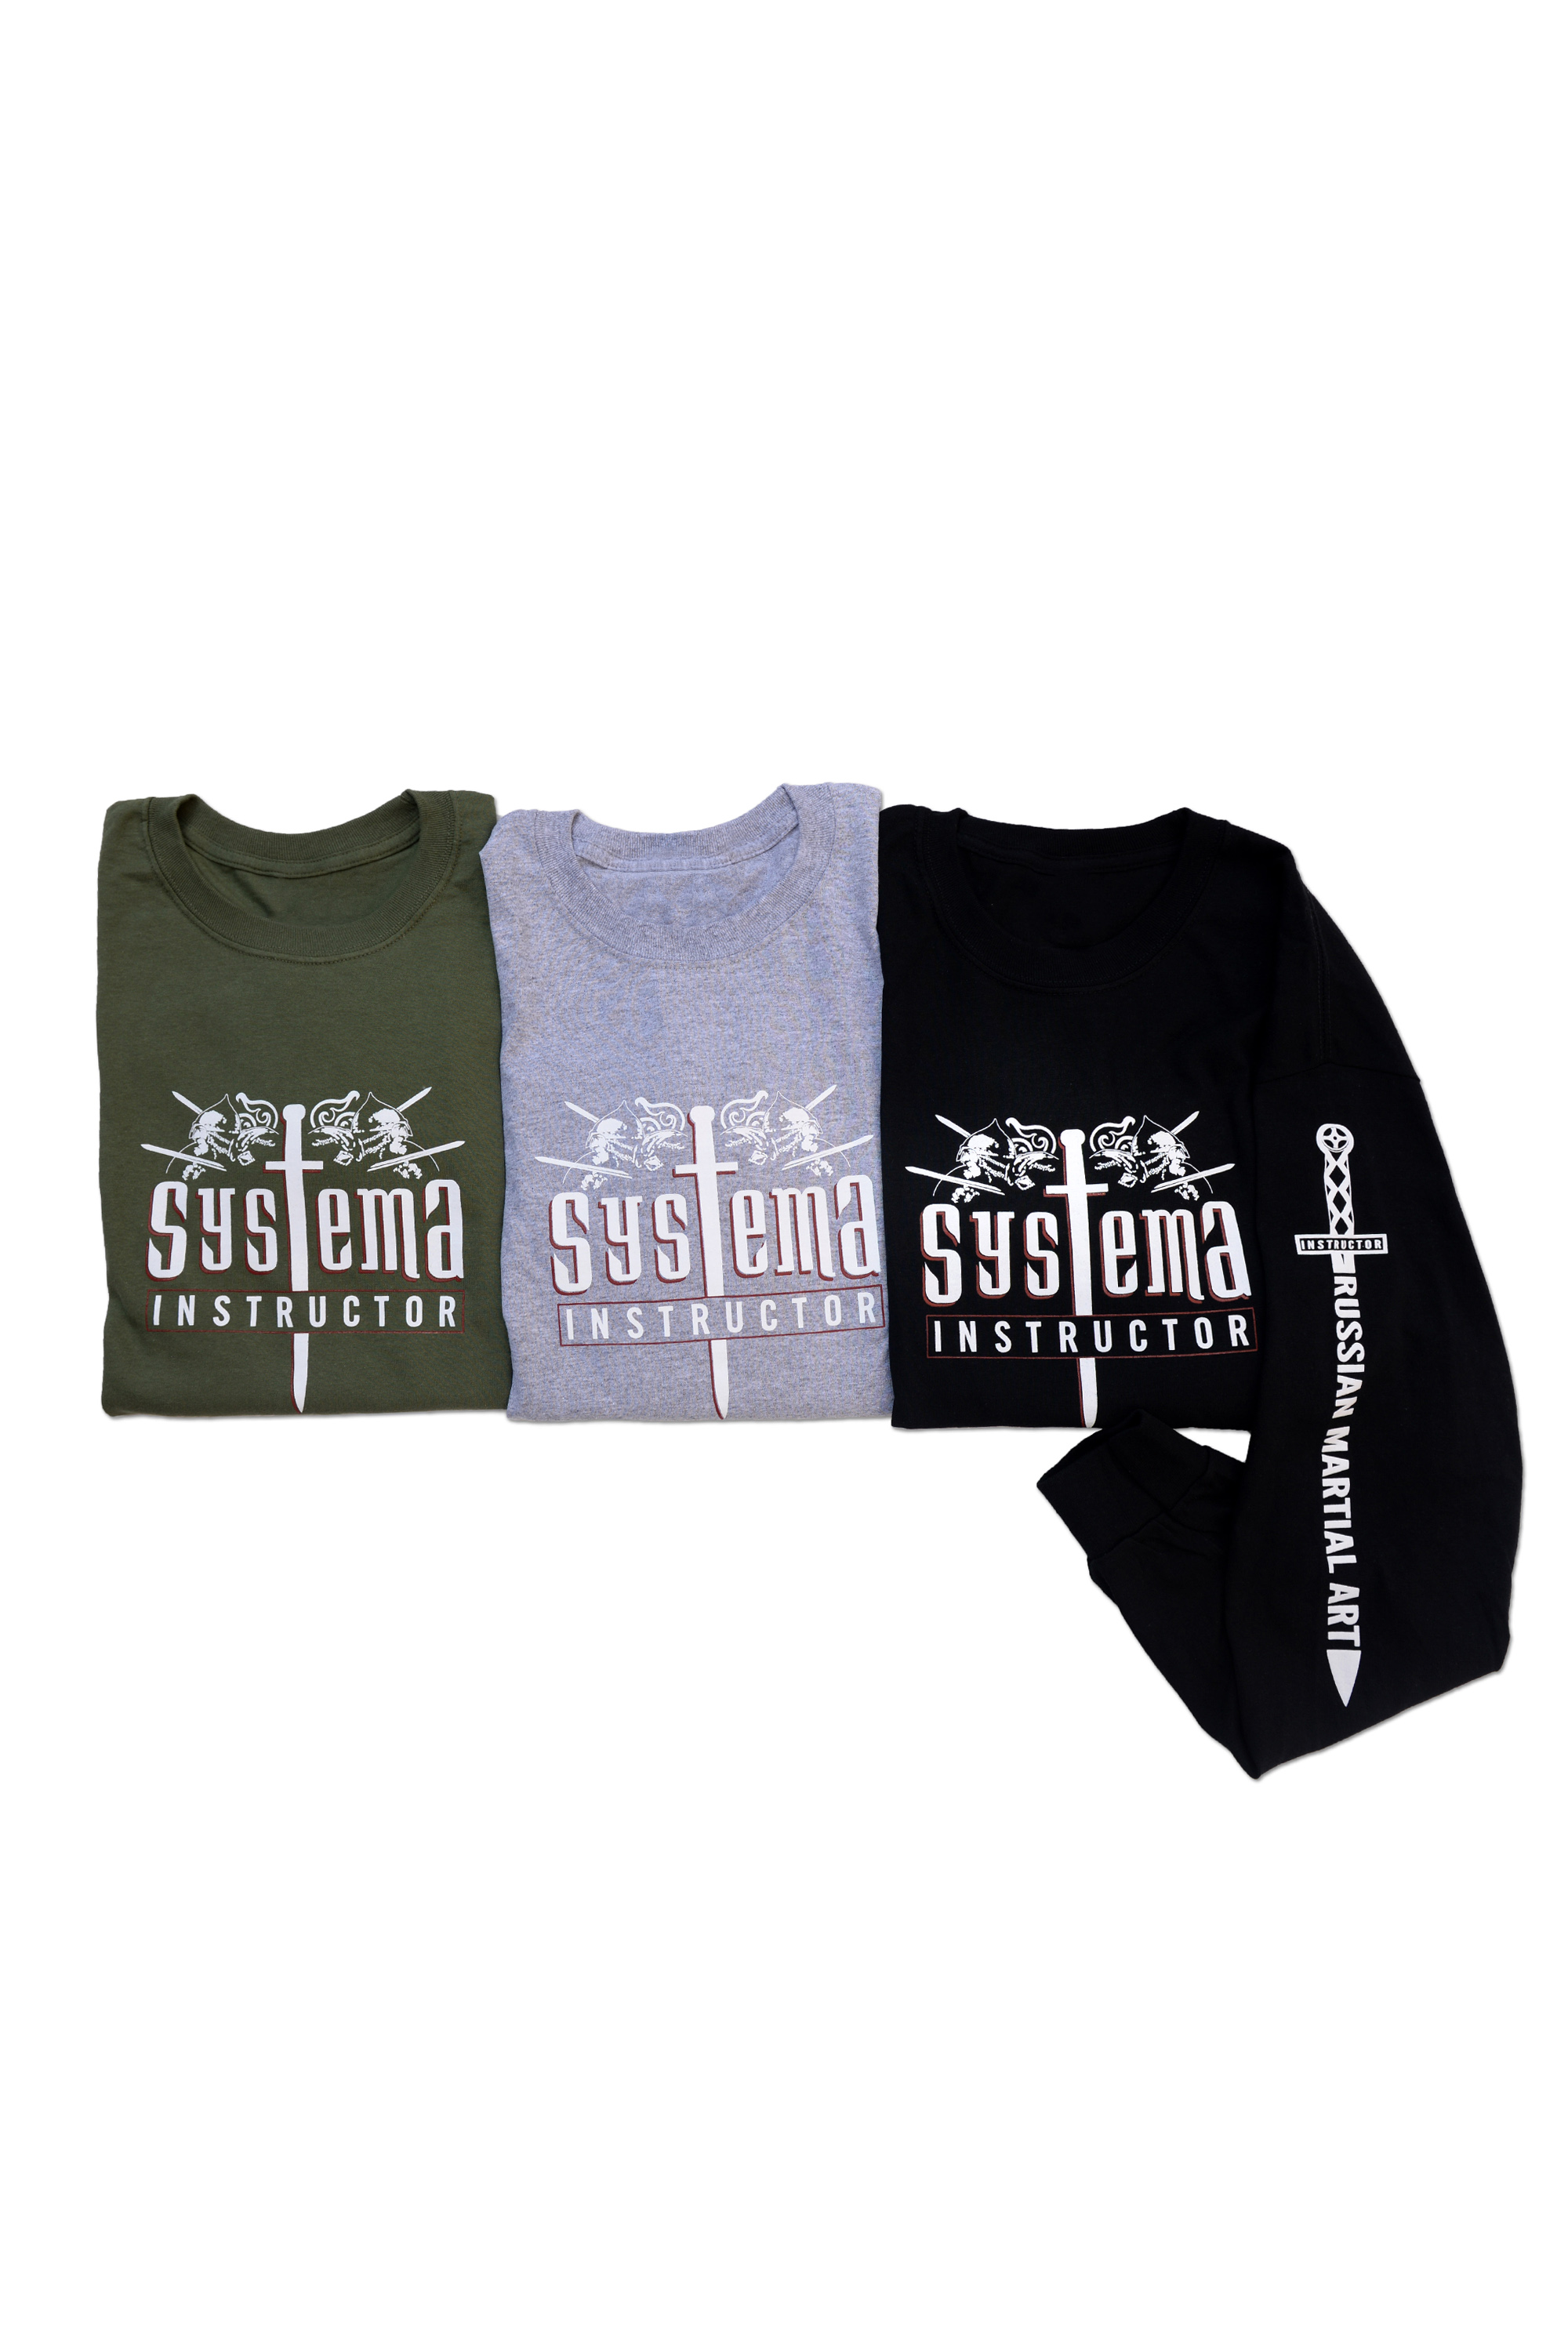 The Official Systema Instructor Long Sleeve Shirt